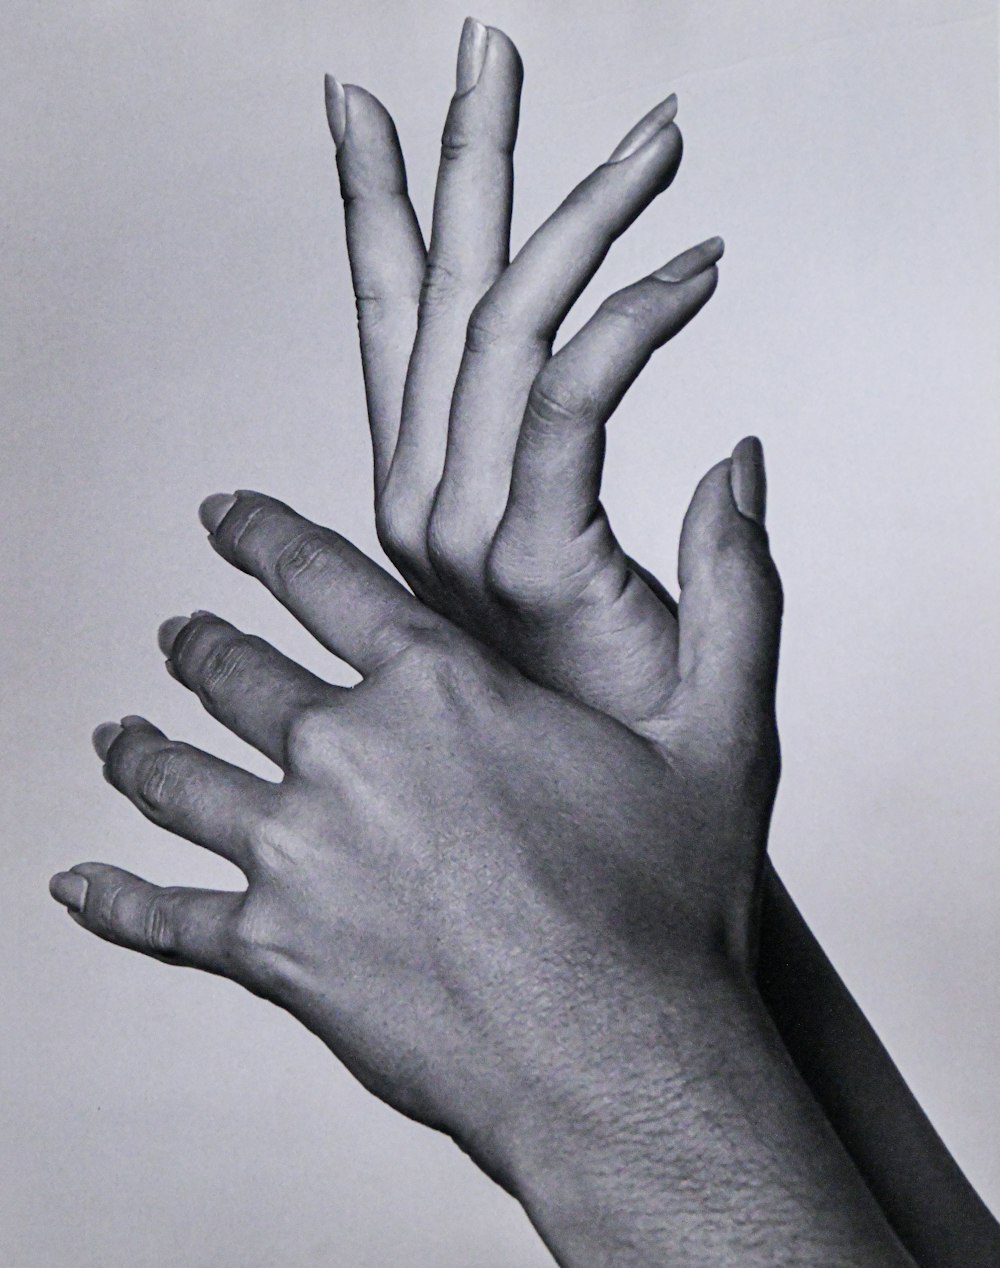 a black and white photo of two hands reaching up